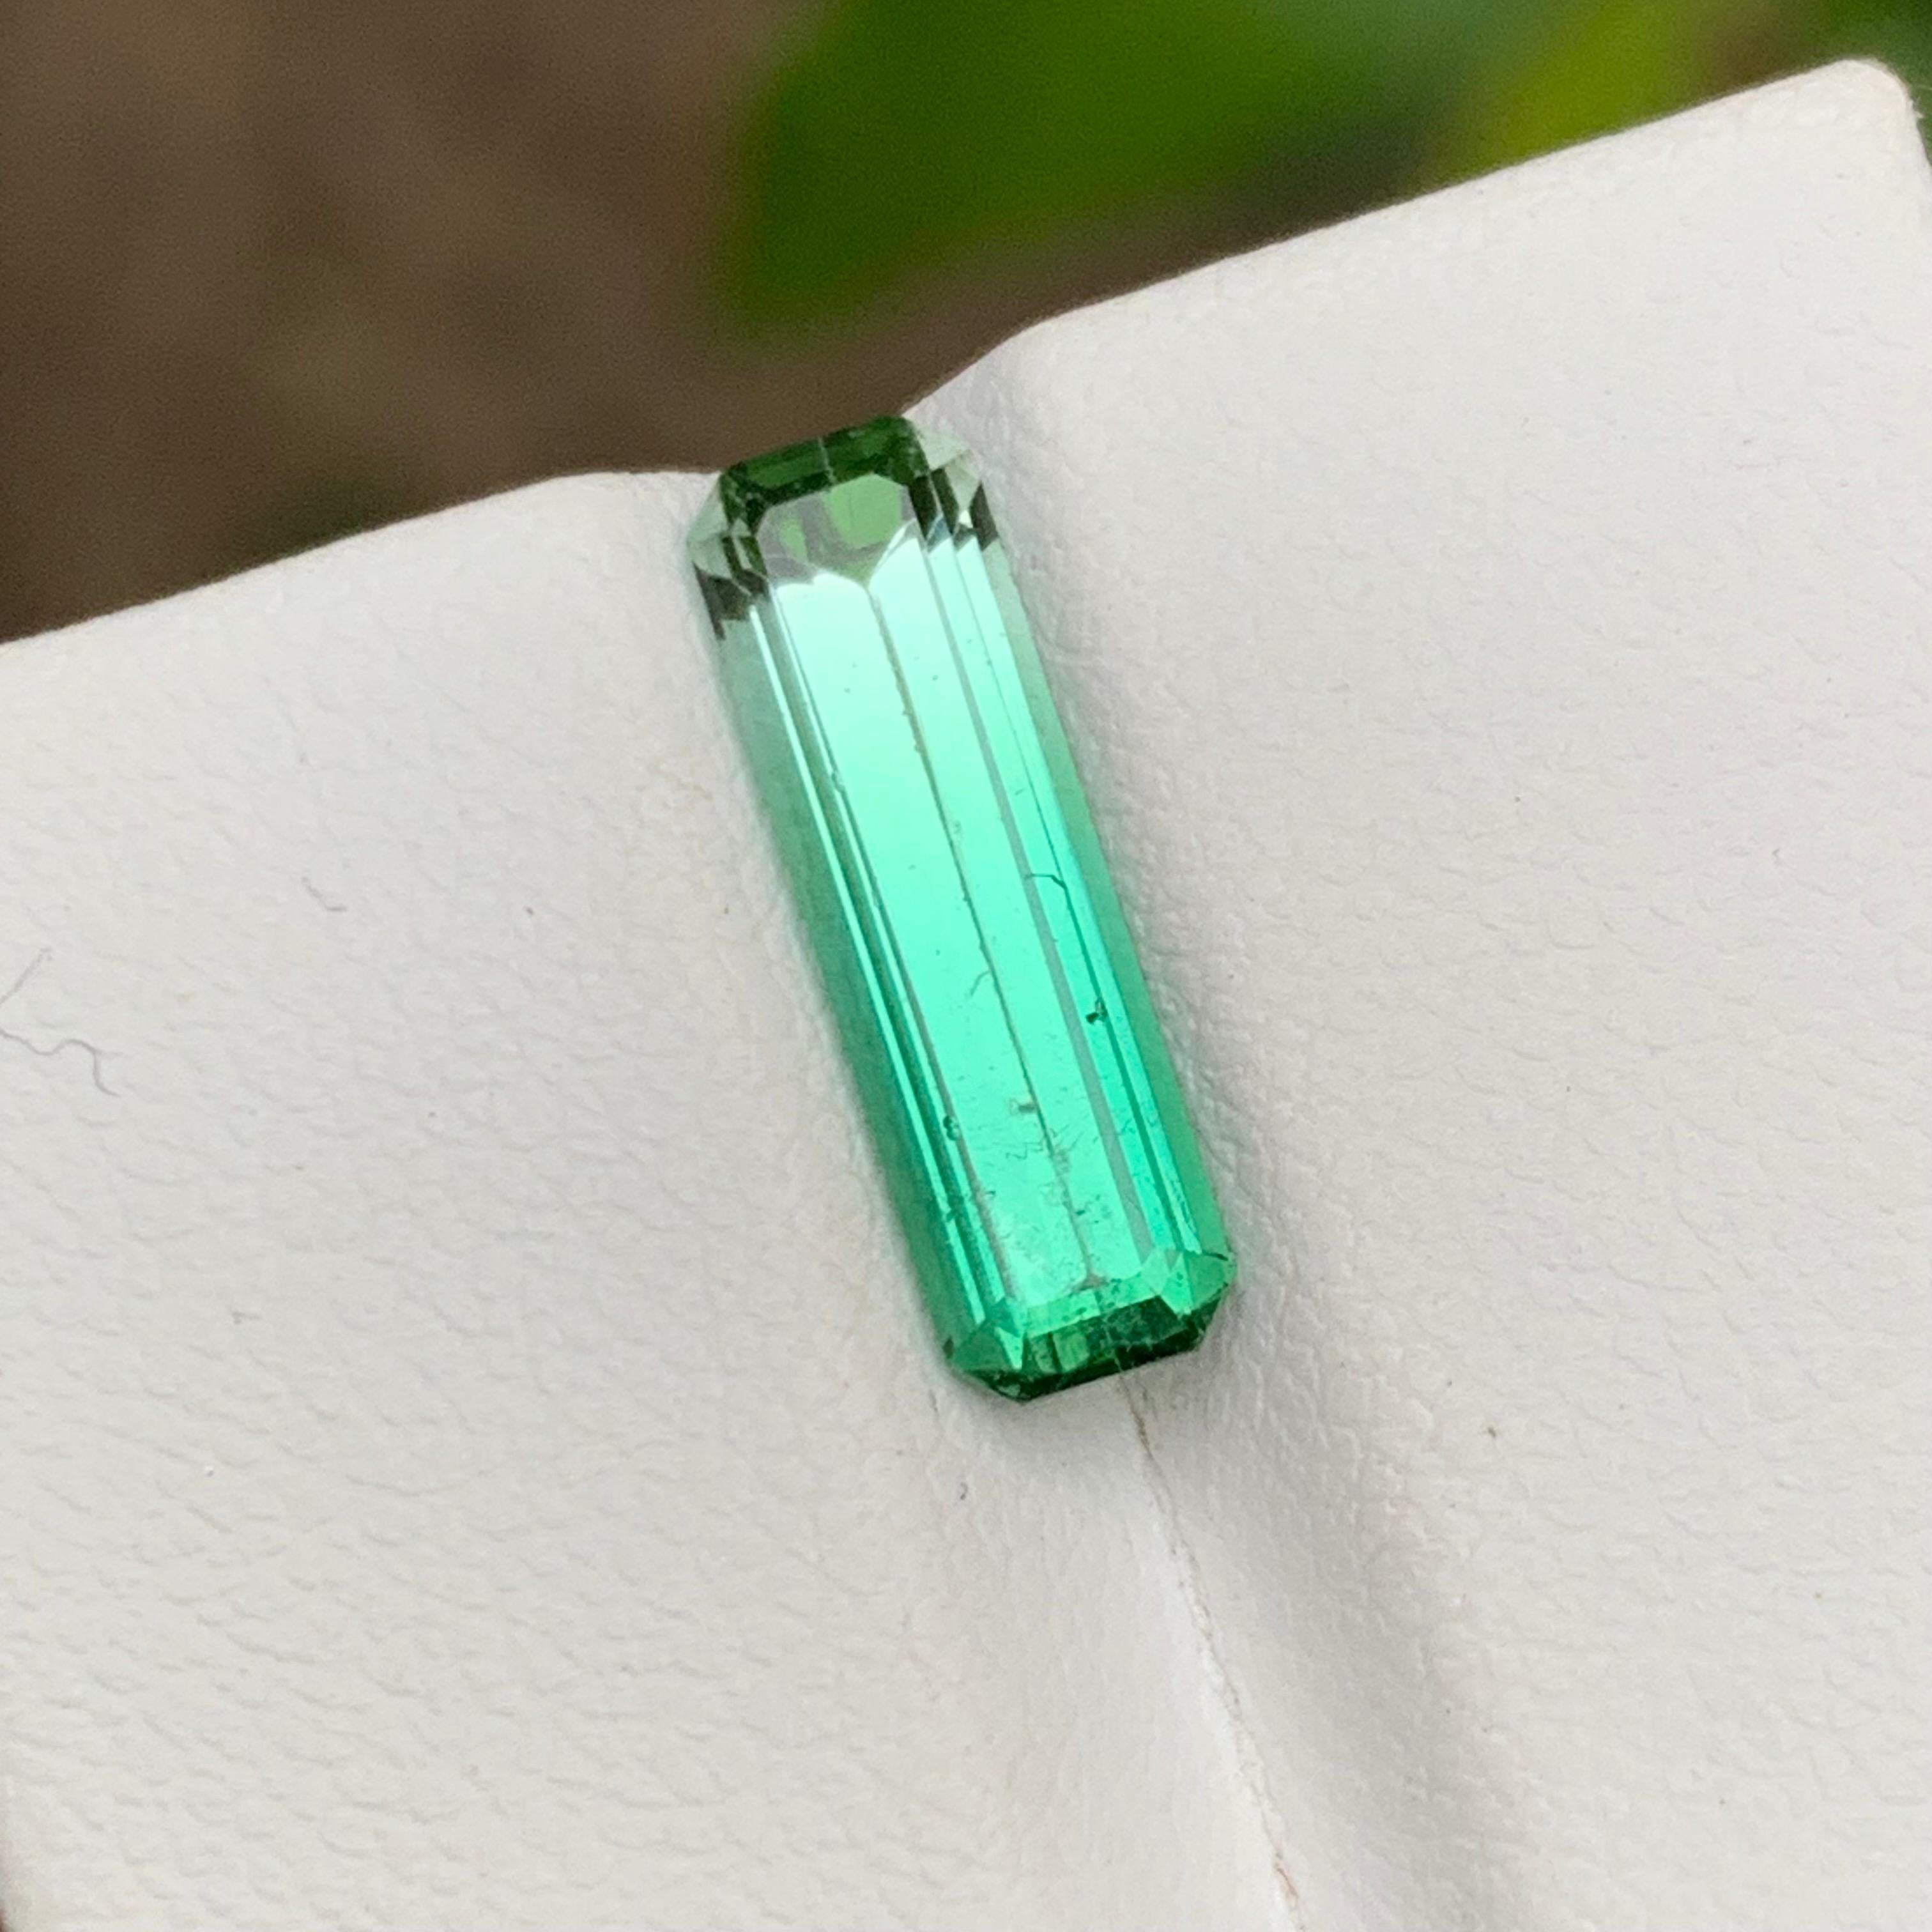 GEMSTONE TYPE: Tourmaline
PIECE(S): 1
WEIGHT: 2.85 Carats
SHAPE: Emerald
SIZE (MM): 15.49 x 4.67 x 4.23
COLOR: Vivid Bluish Green Bicolor
CLARITY: Slightly Included 
TREATMENT: None
ORIGIN: Afghanistan
CERTIFICATE: On demand

Indulge in the allure